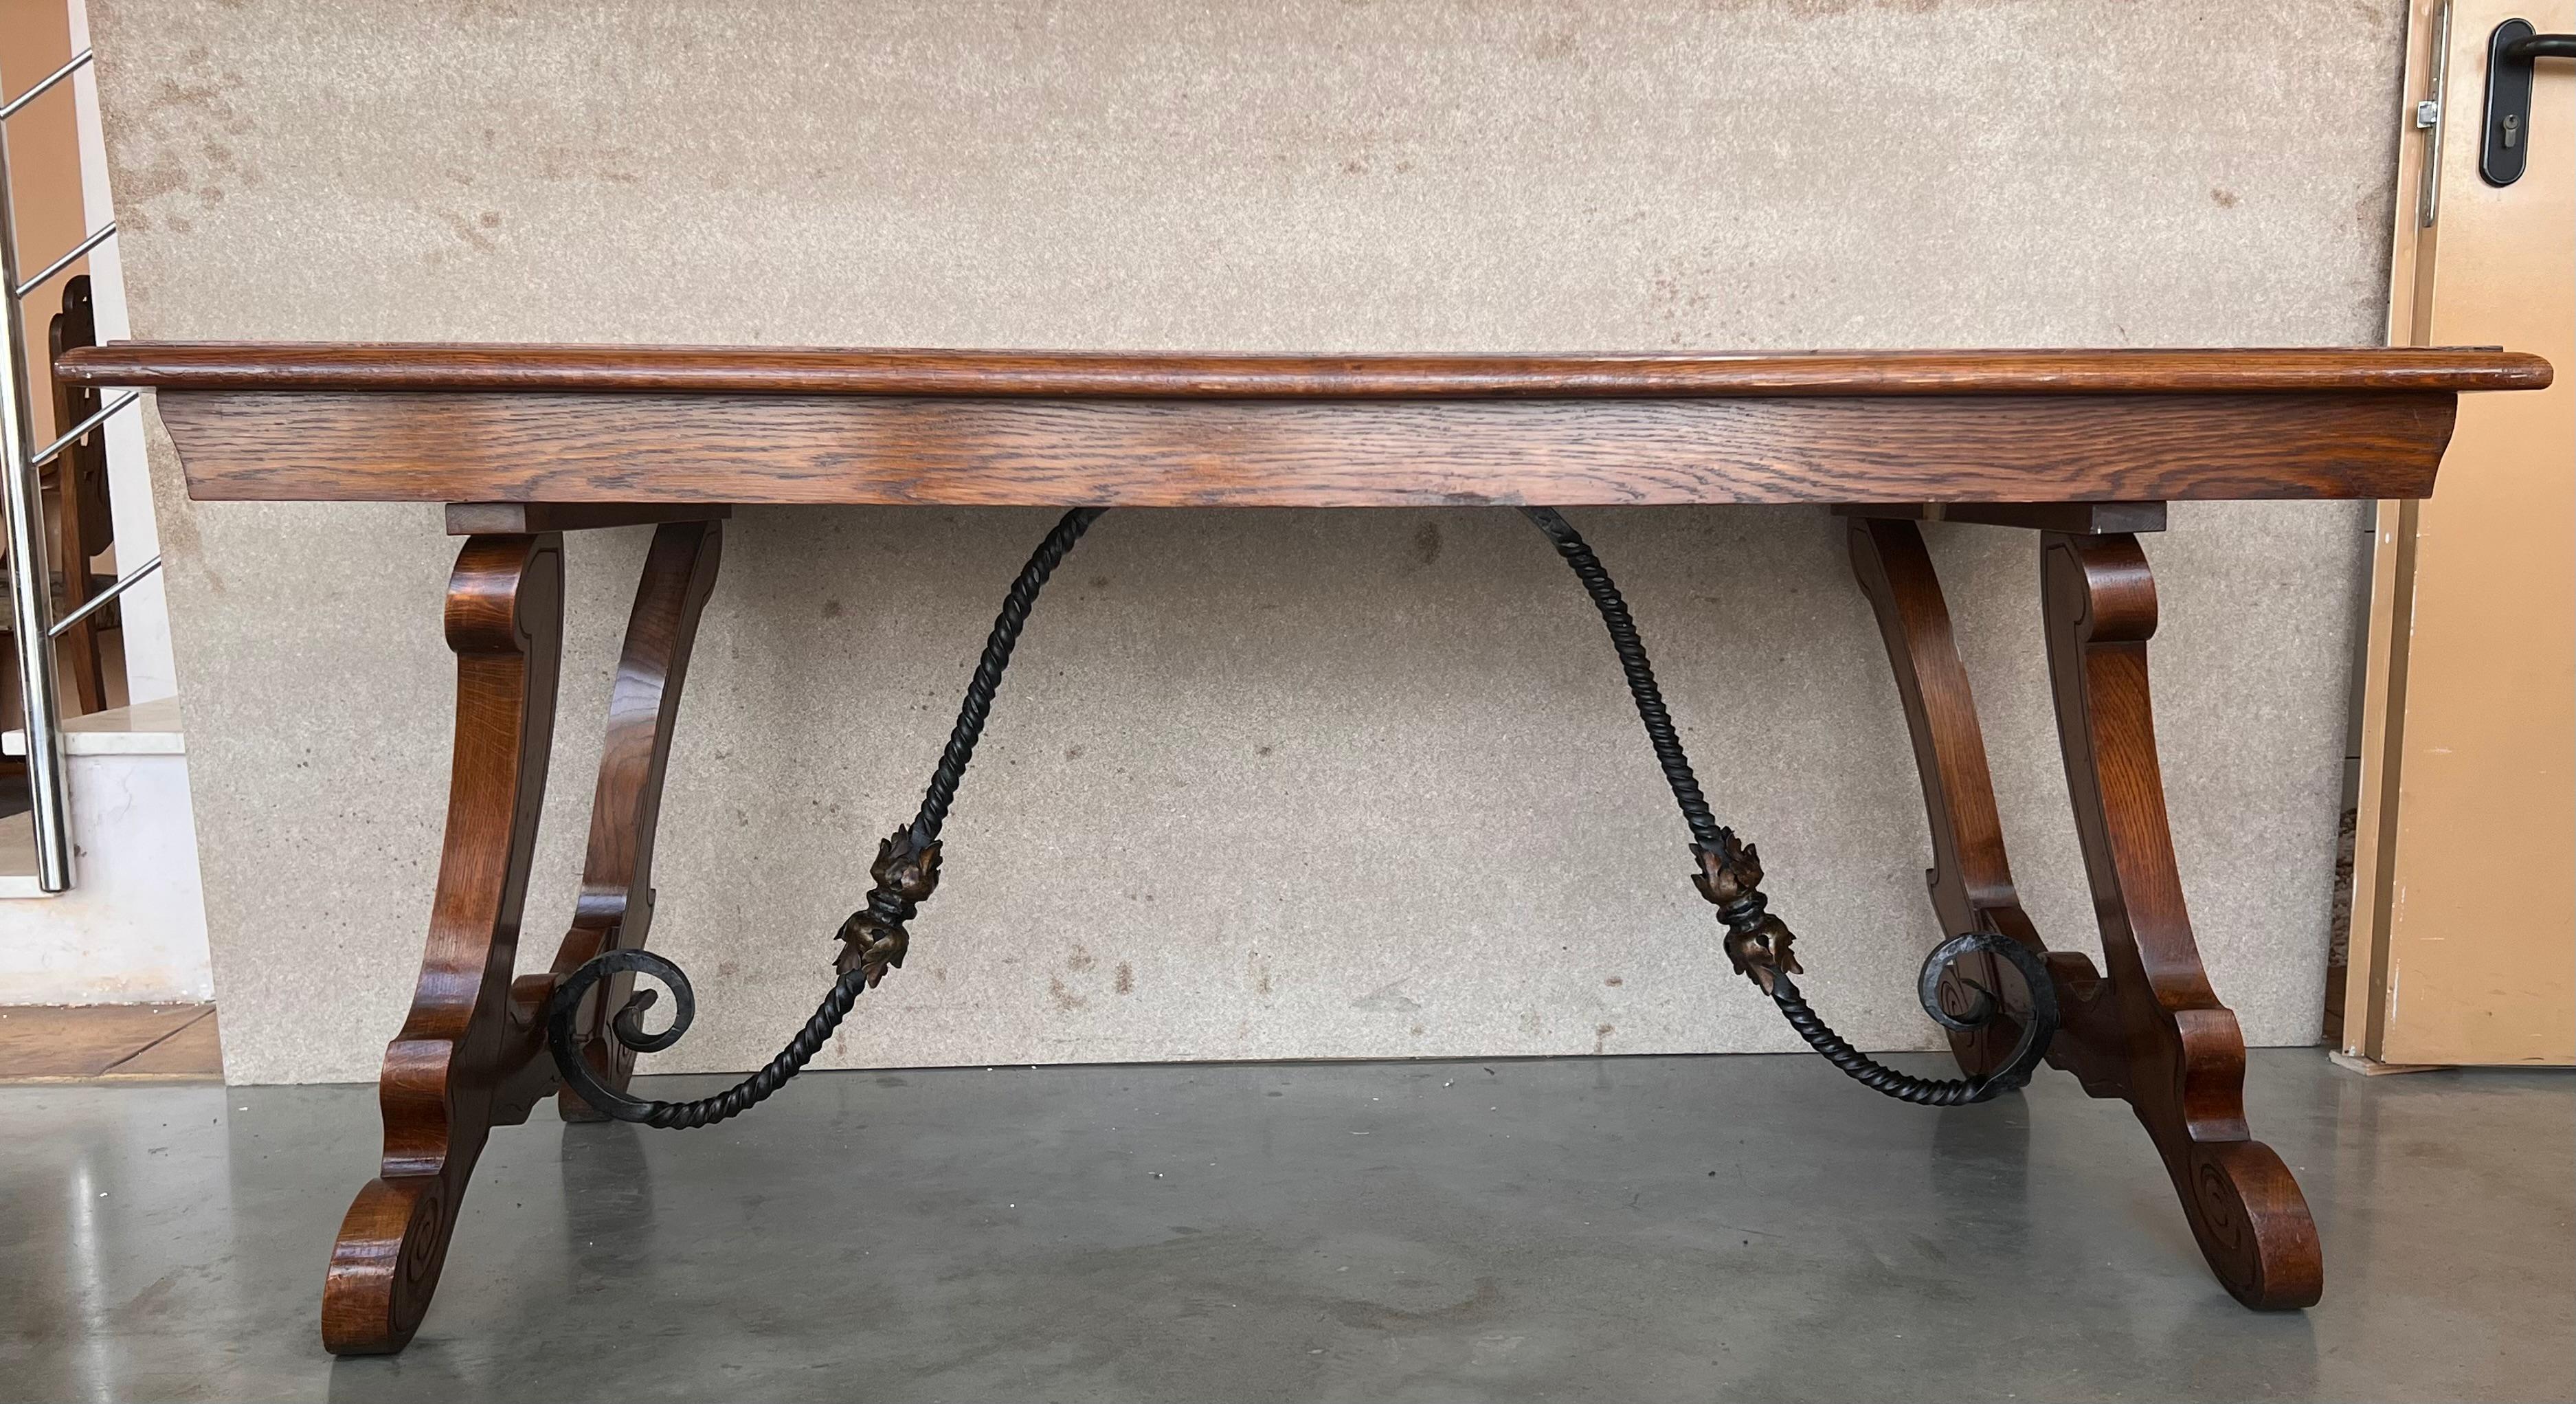 A monumental 20th century Spanish trestle table, having a rectangular framed solid walnut board top, resting on hand carved, classical lyre legs joined by beautifully iron stretchers.

This table was designed for a grand room and seats 6 very